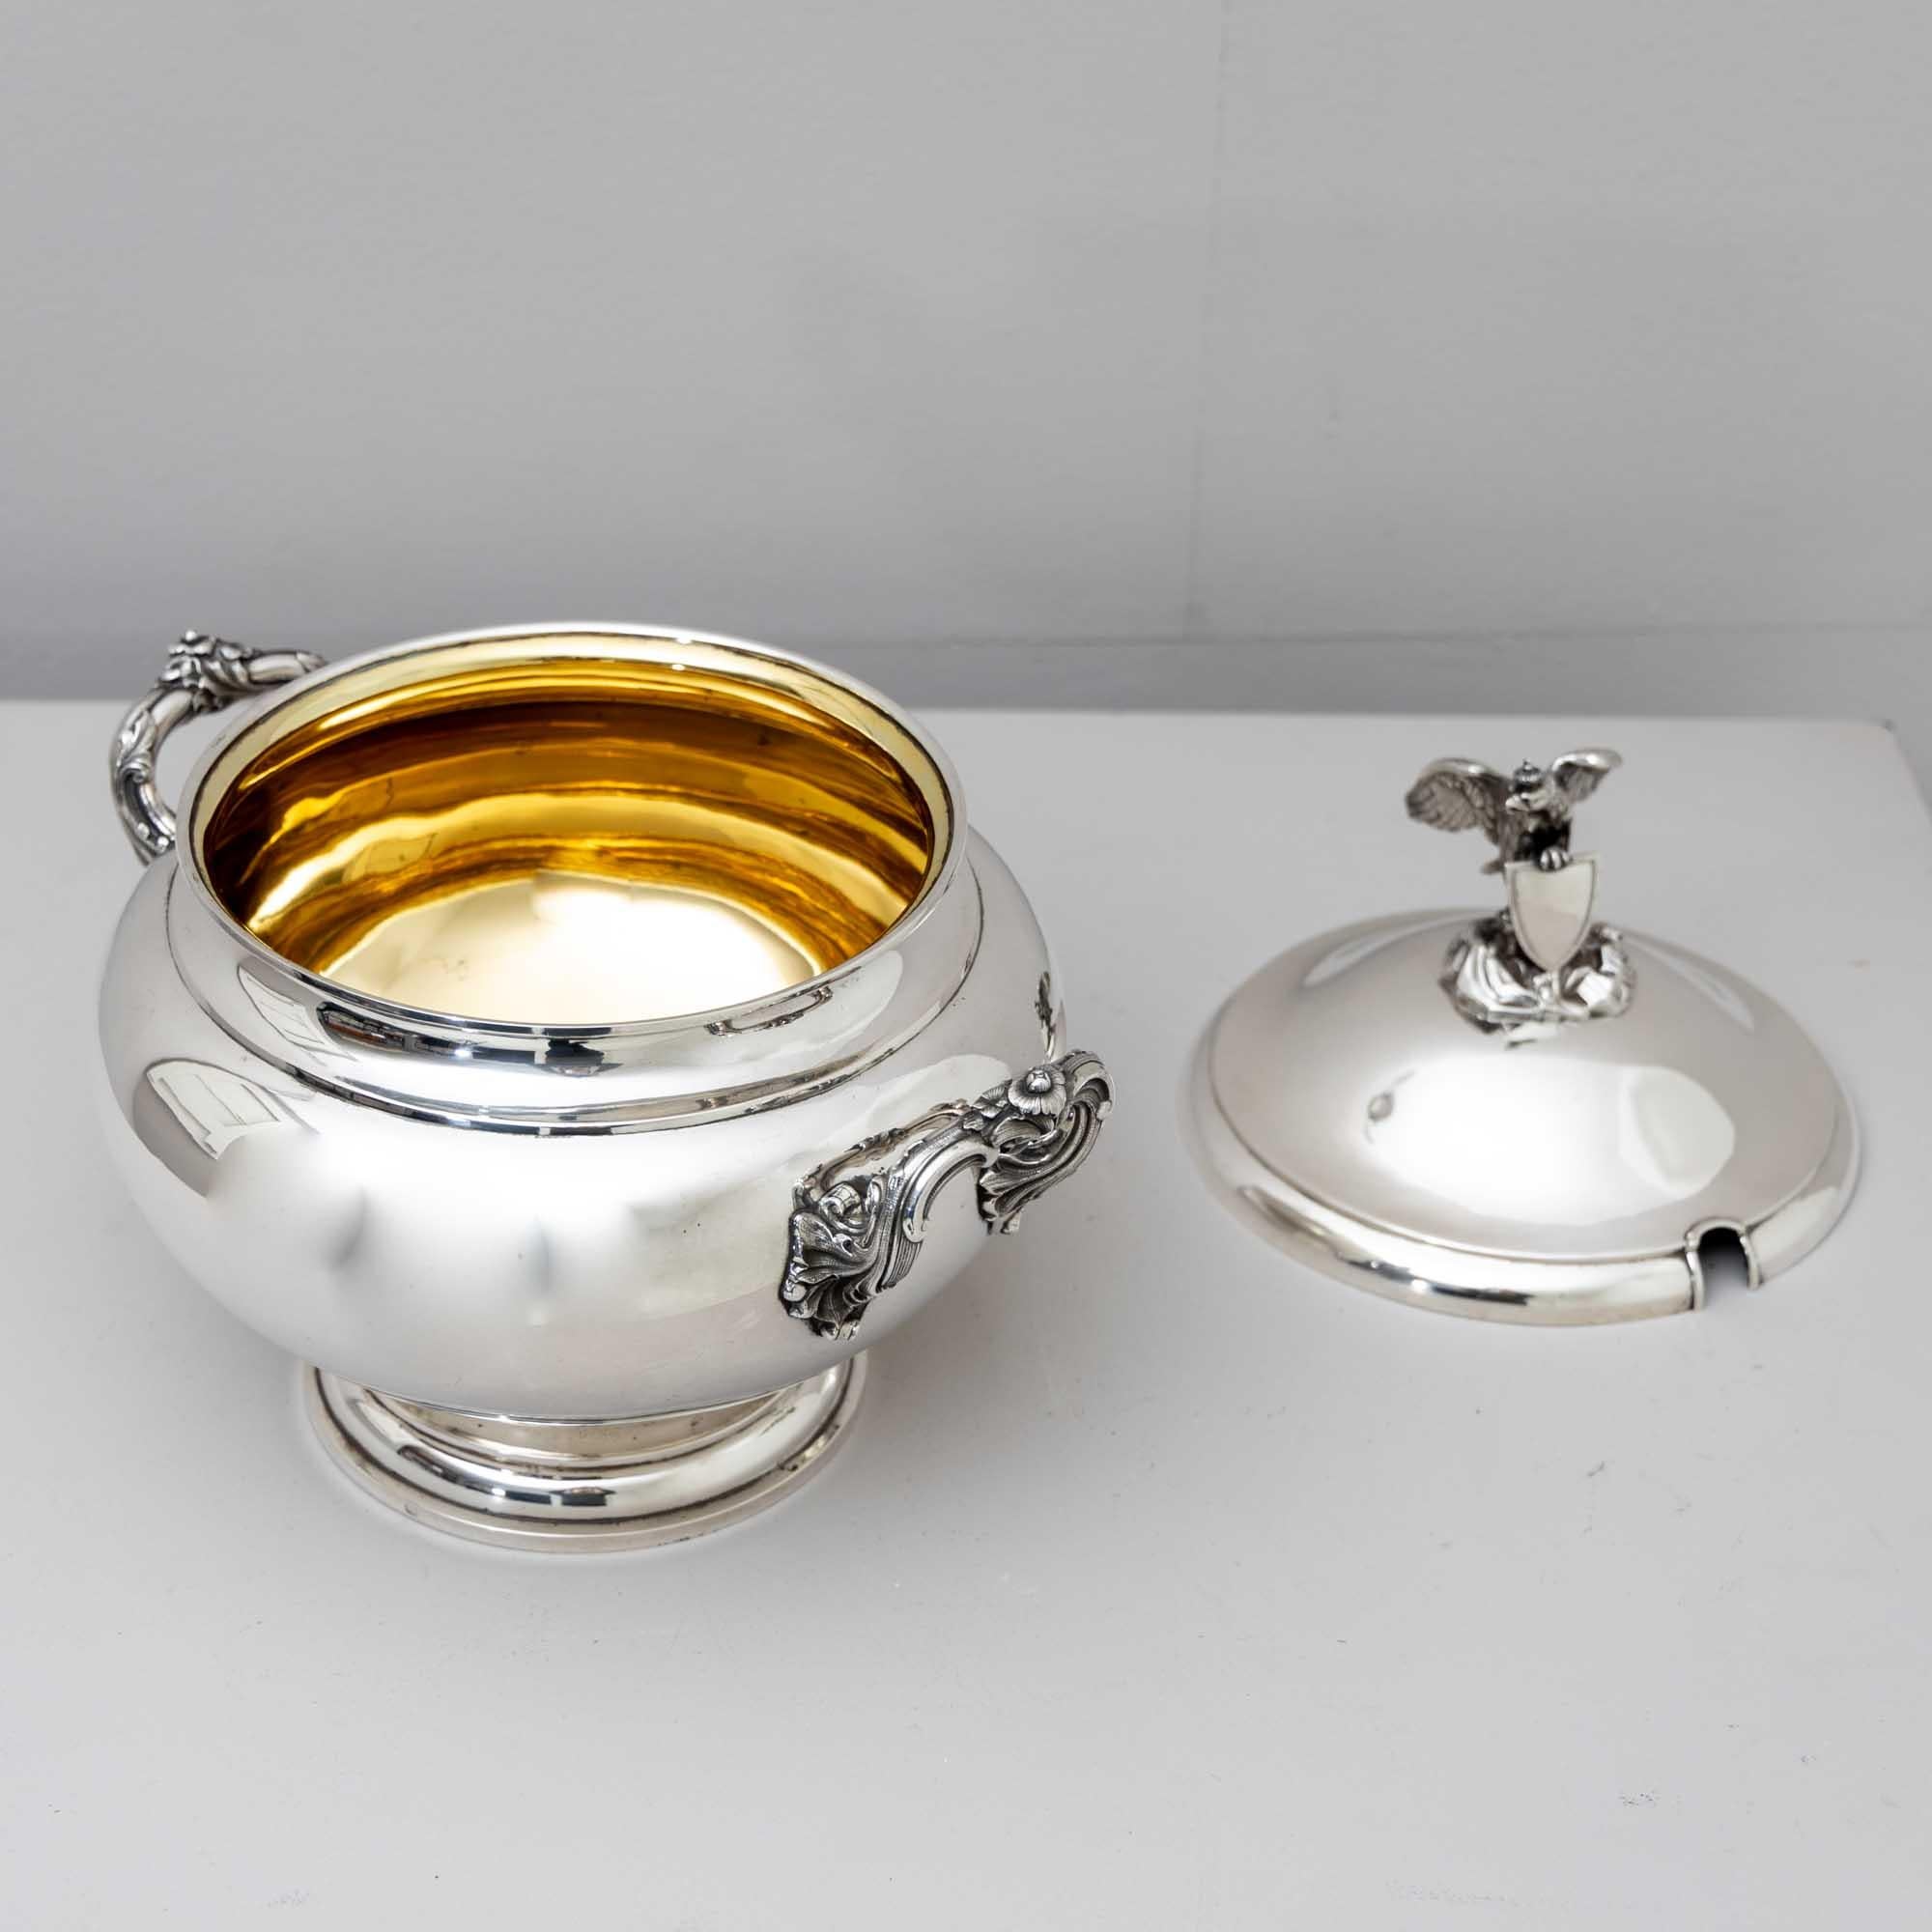 Large 750 silver lidded tureen by Maker Hermann Brückmann, with figurative crowned eagle holding a shield on a stylized landscape base. The handles are in rocaille form, the bulging wall is otherwise smooth. Total weight approx. 1680g.